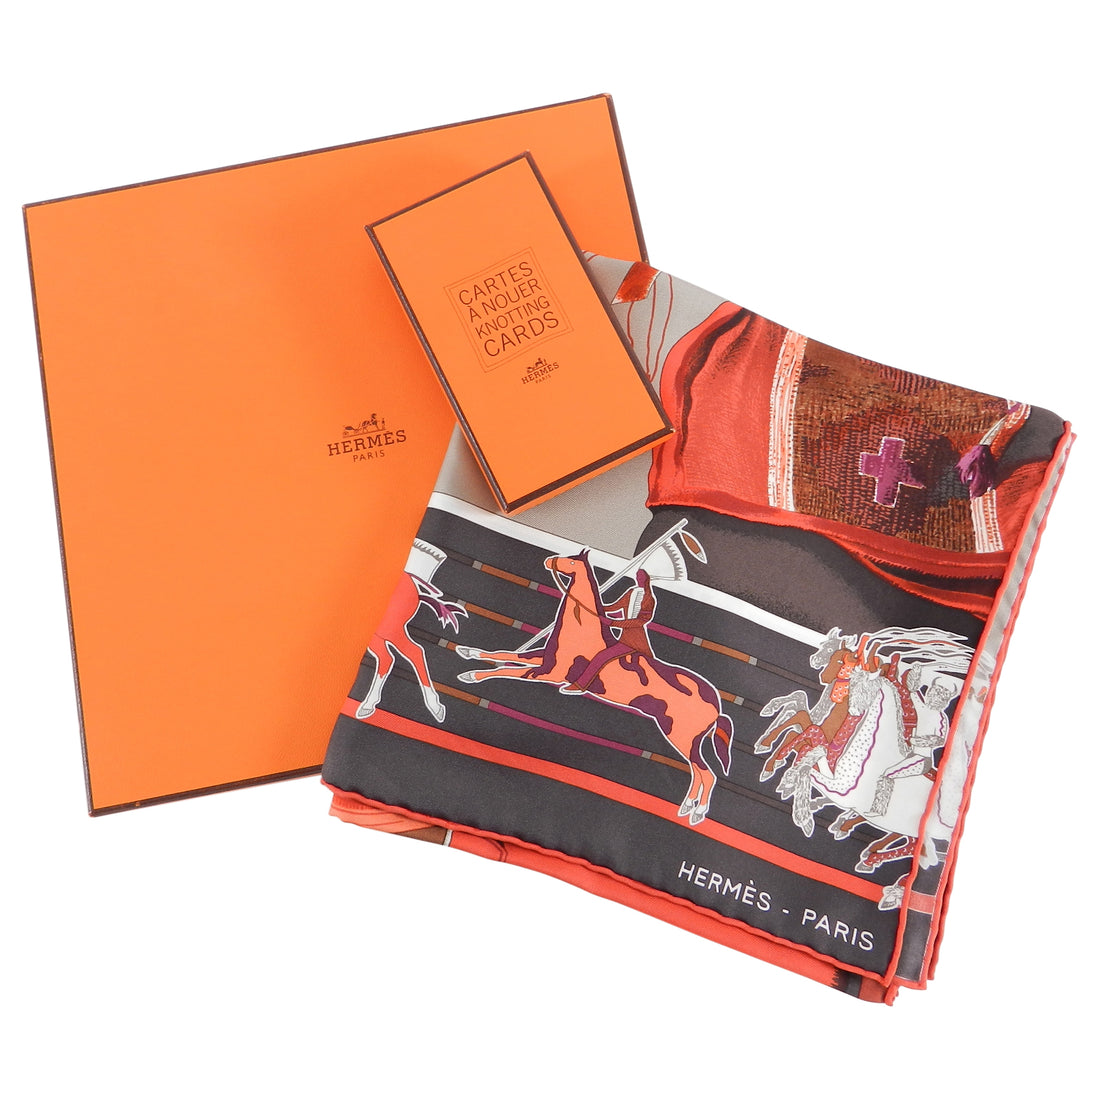 Hermes Carre en Carres 90cm Silk Twill Scarf and Knotting Cards